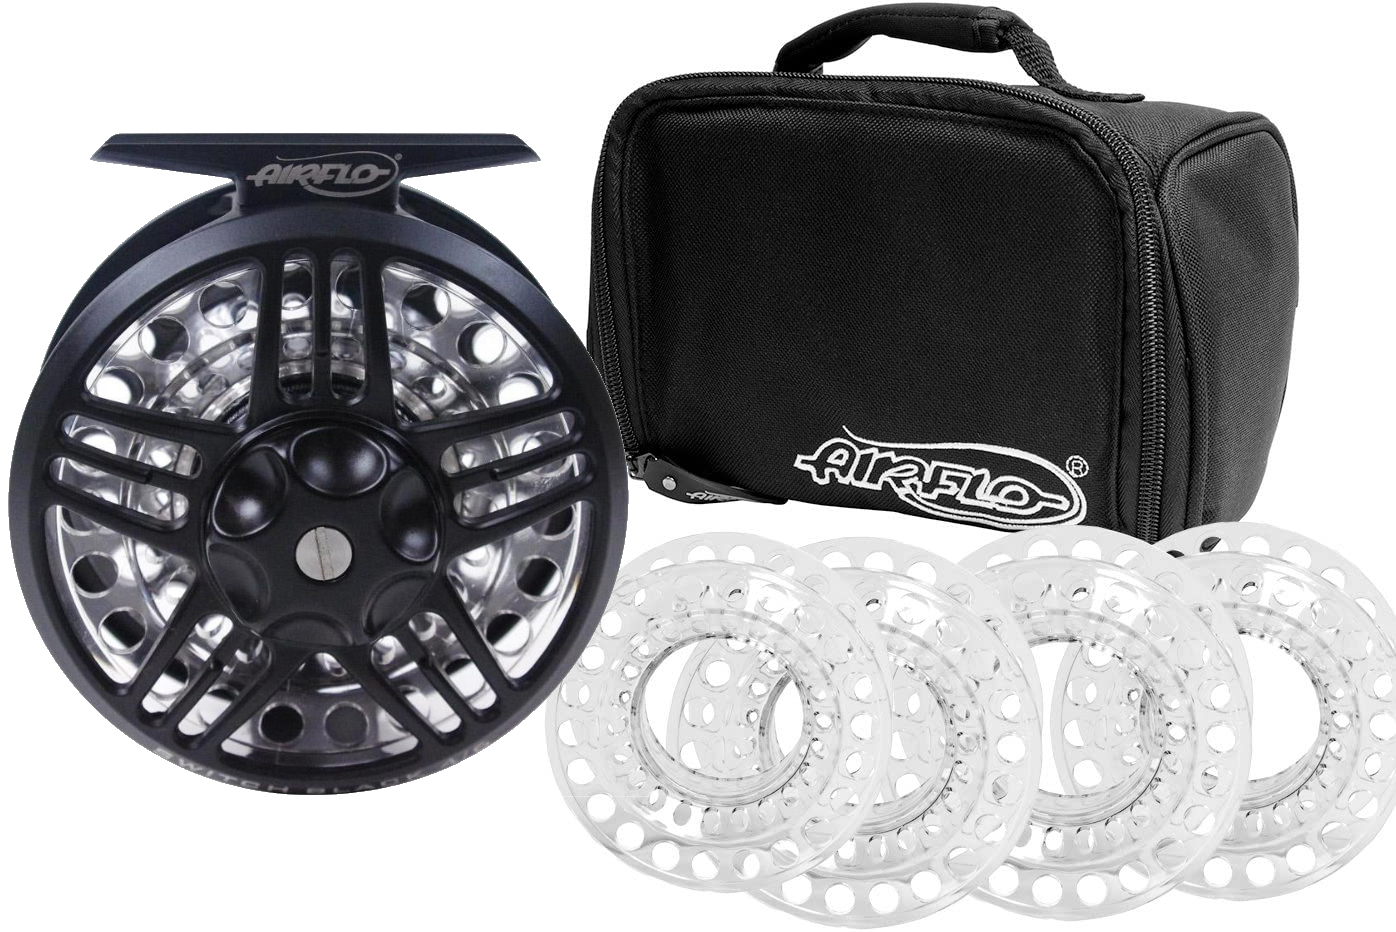 Airflo Switch Black Cassette Reel + 4 Spools – Glasgow Angling Centre